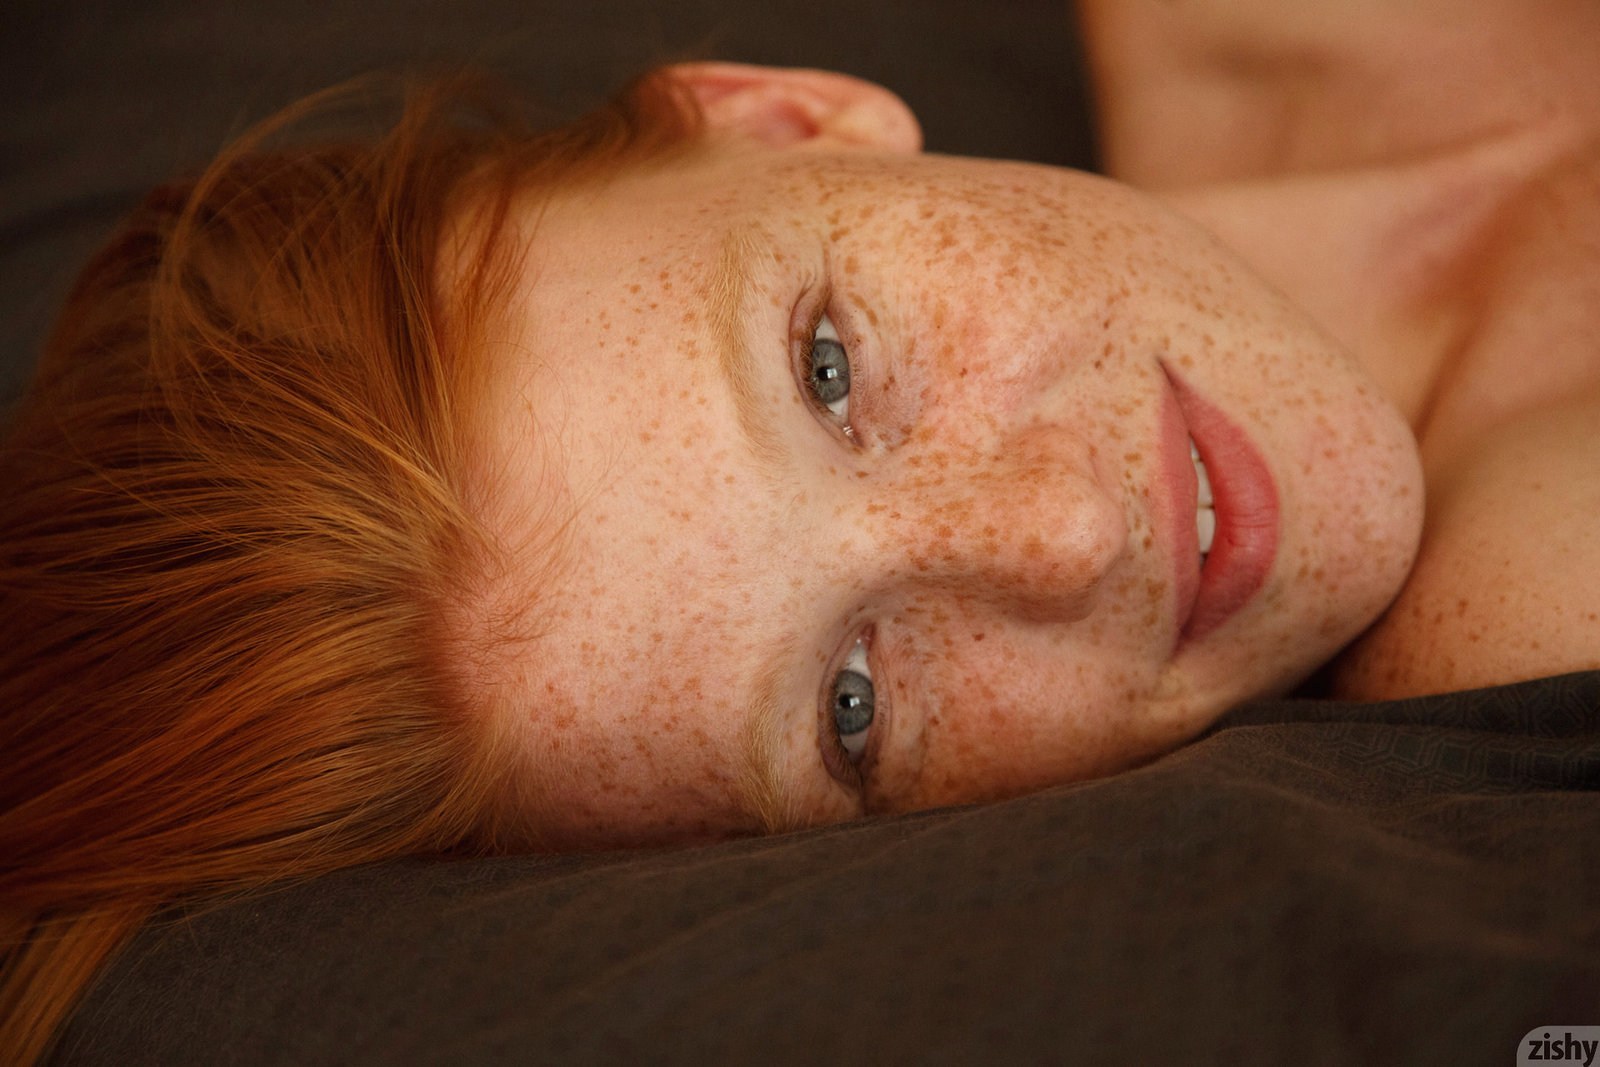 Freckle Redhead Porn Stars - Sex with A Redhead with Freckles (55 photos) - motherless porn pics